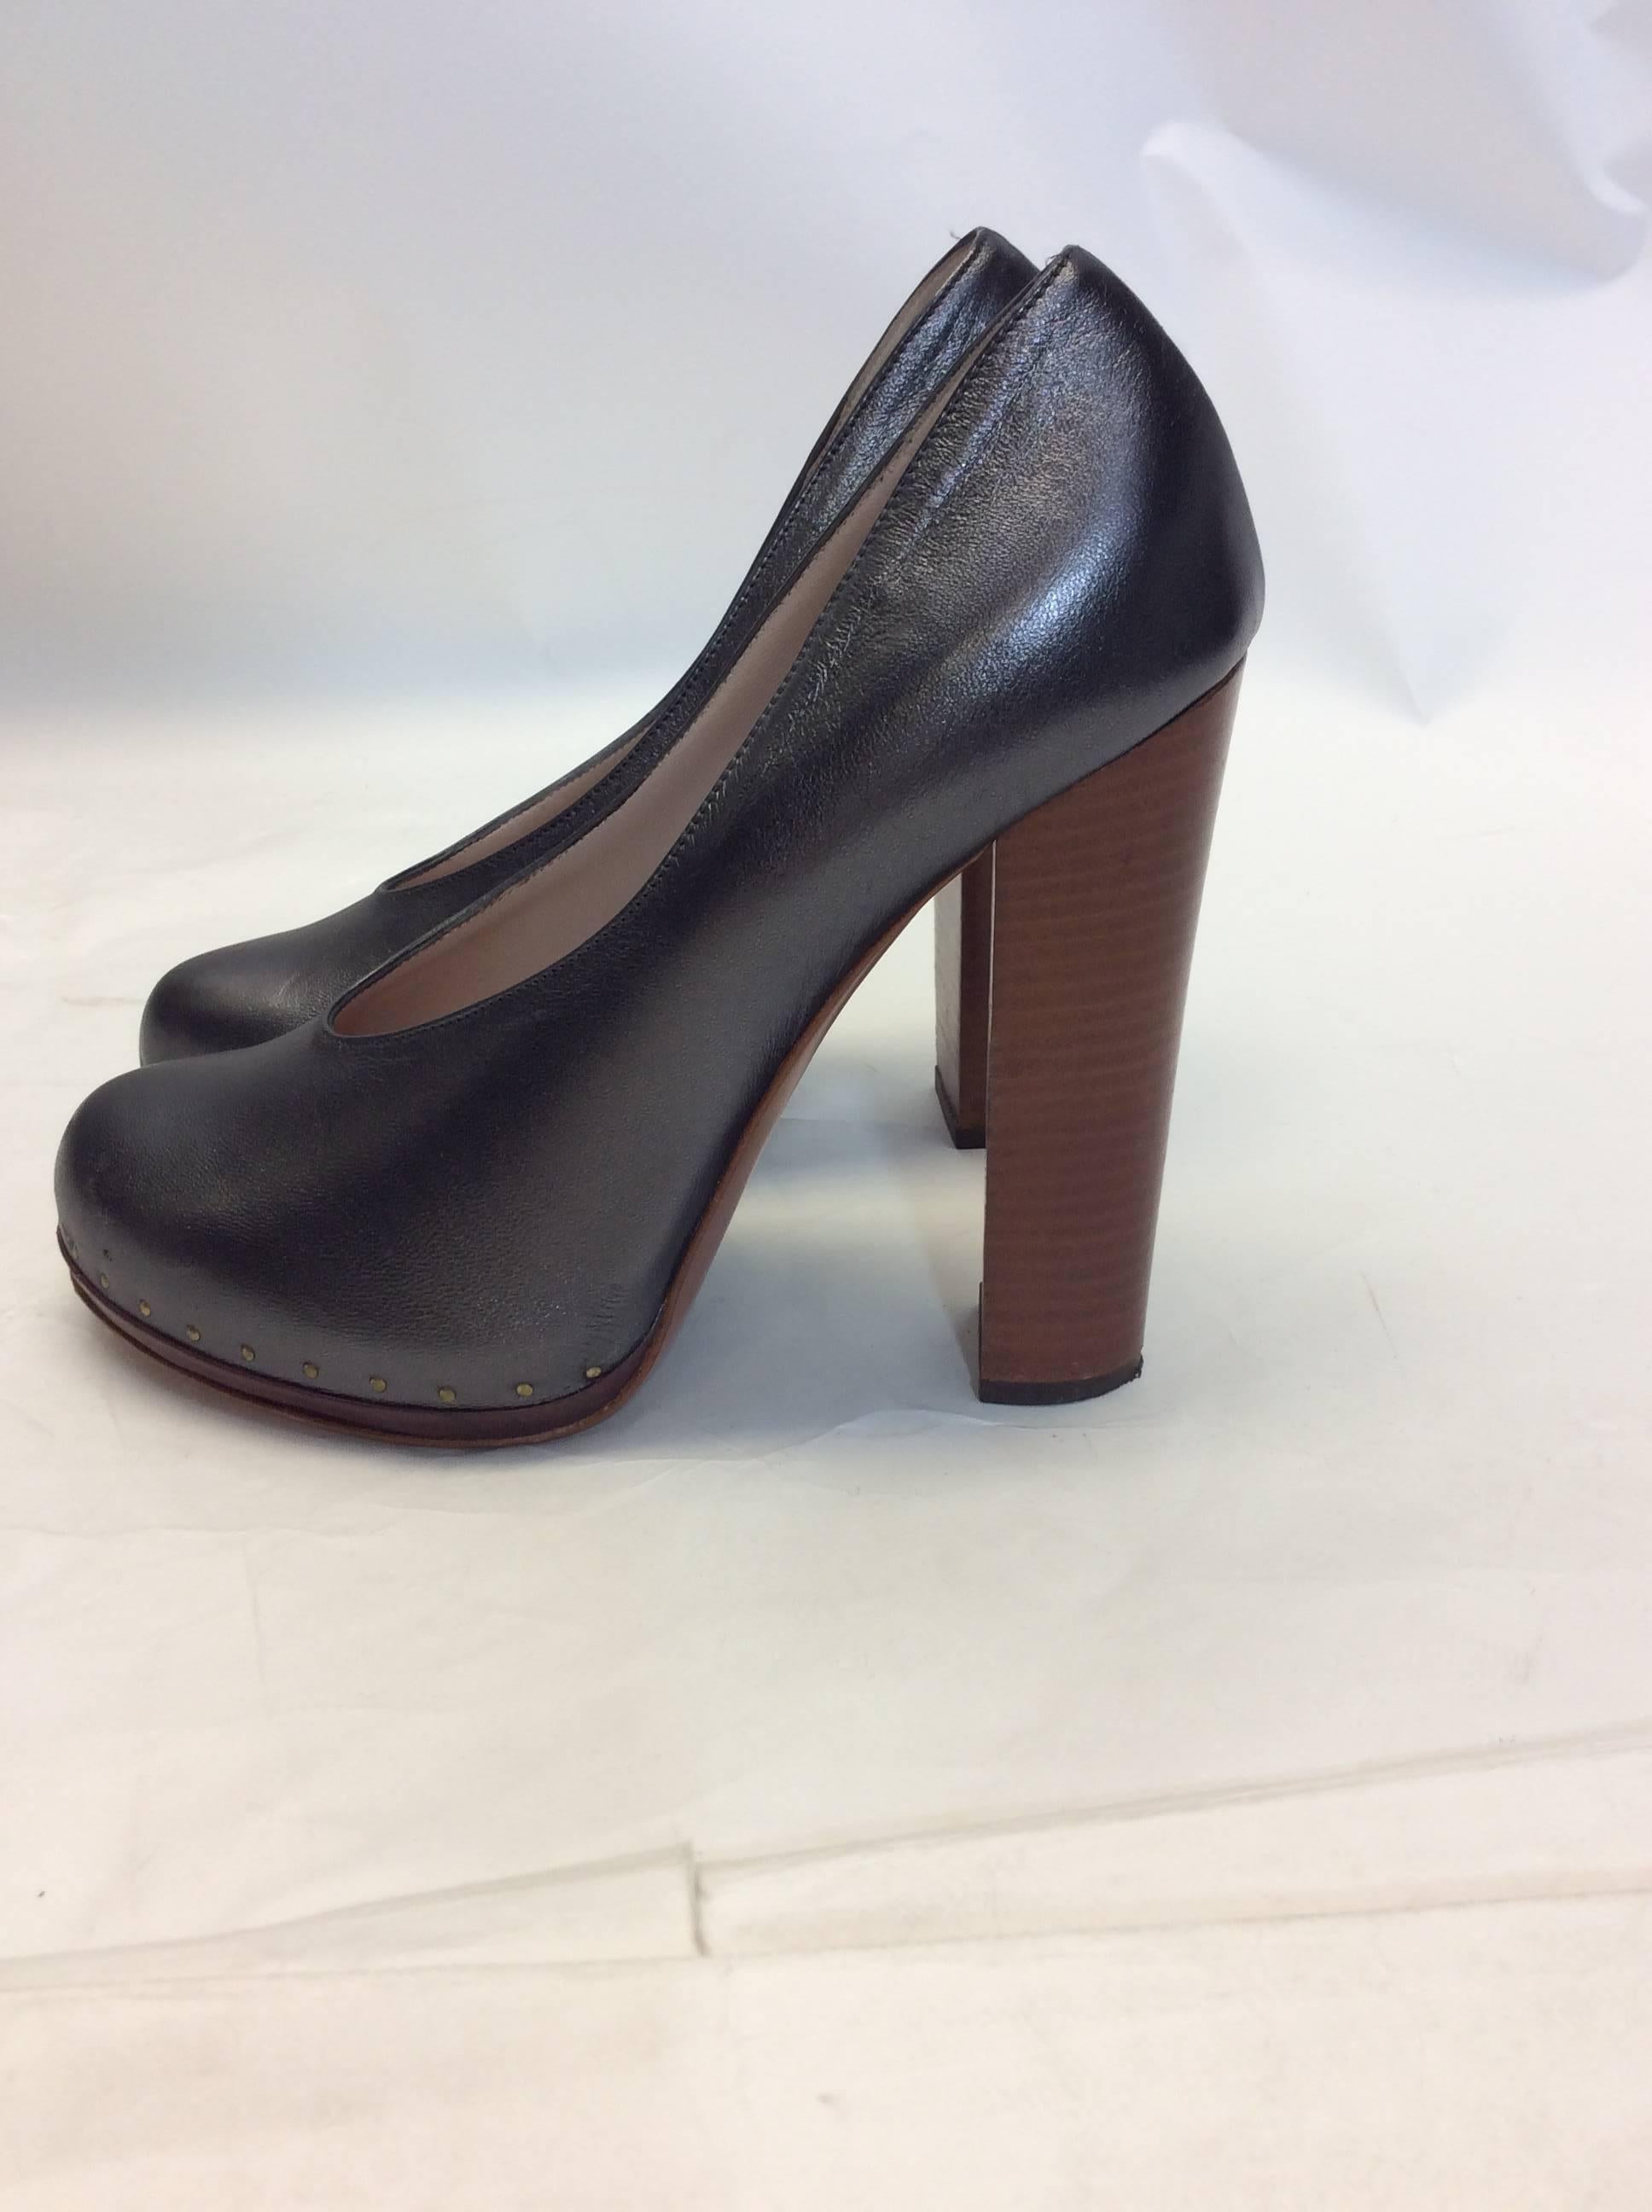 Vionnet Leather Block Heels
100% Leather
Size 38
Made in Italy
5 inch block heel
$250